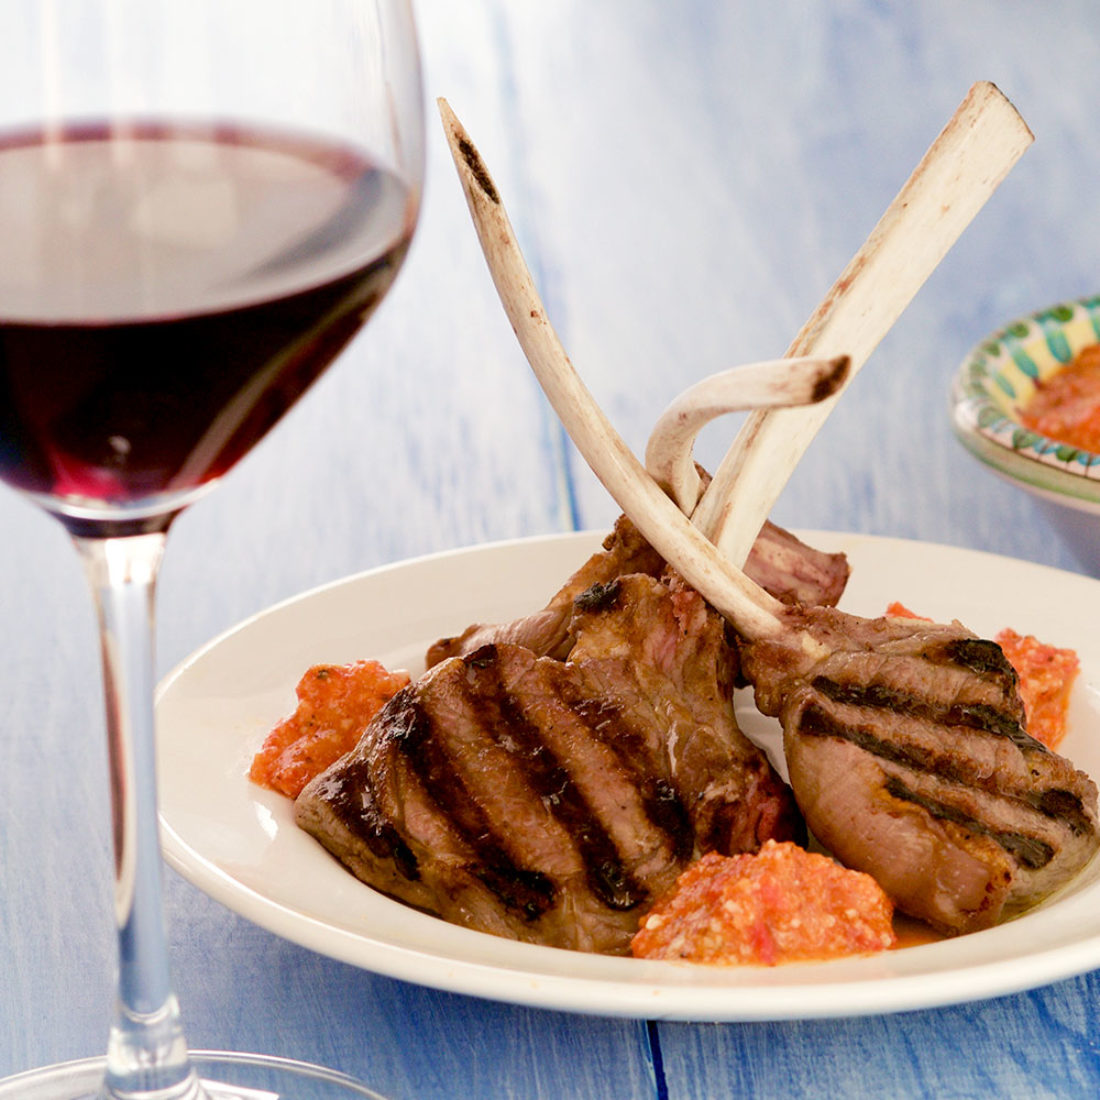 Grilled Lamb Chops Scottadita with Spicy Sicilian Almond Red Pepper Sauce